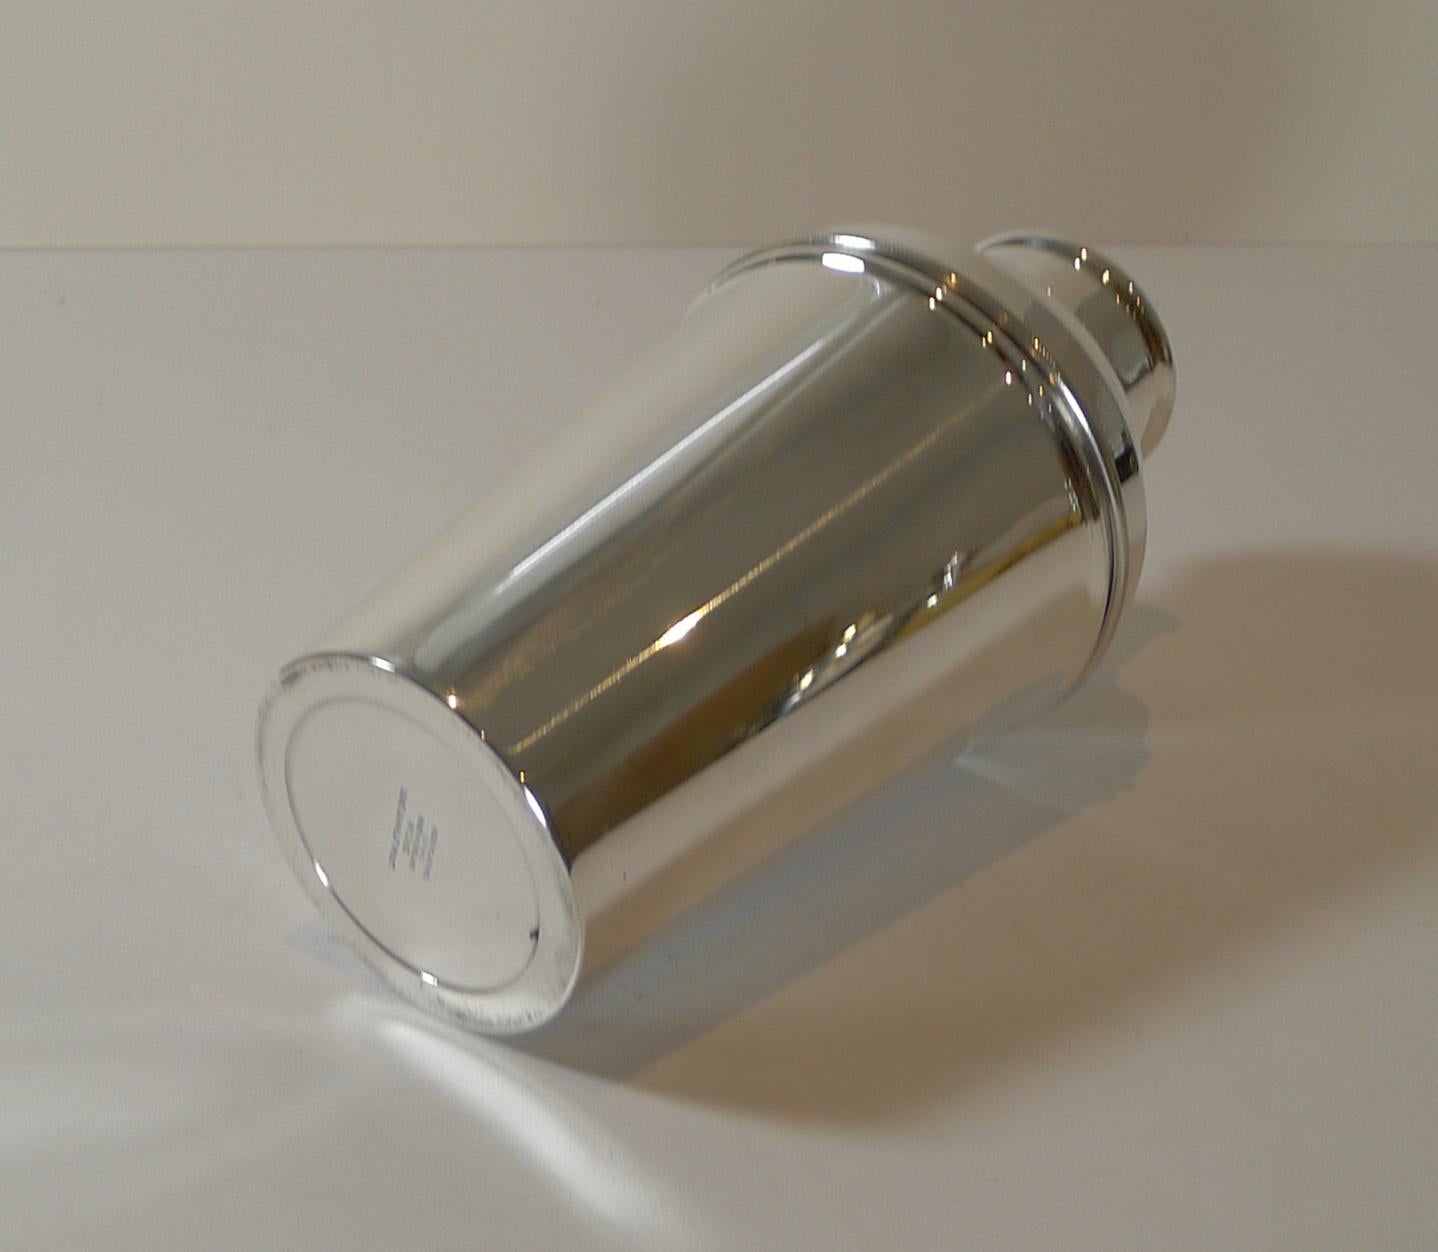 English Large 1 1/2 Pint Silver Plated Cocktail Shaker by Suckling Ltd. c.1930